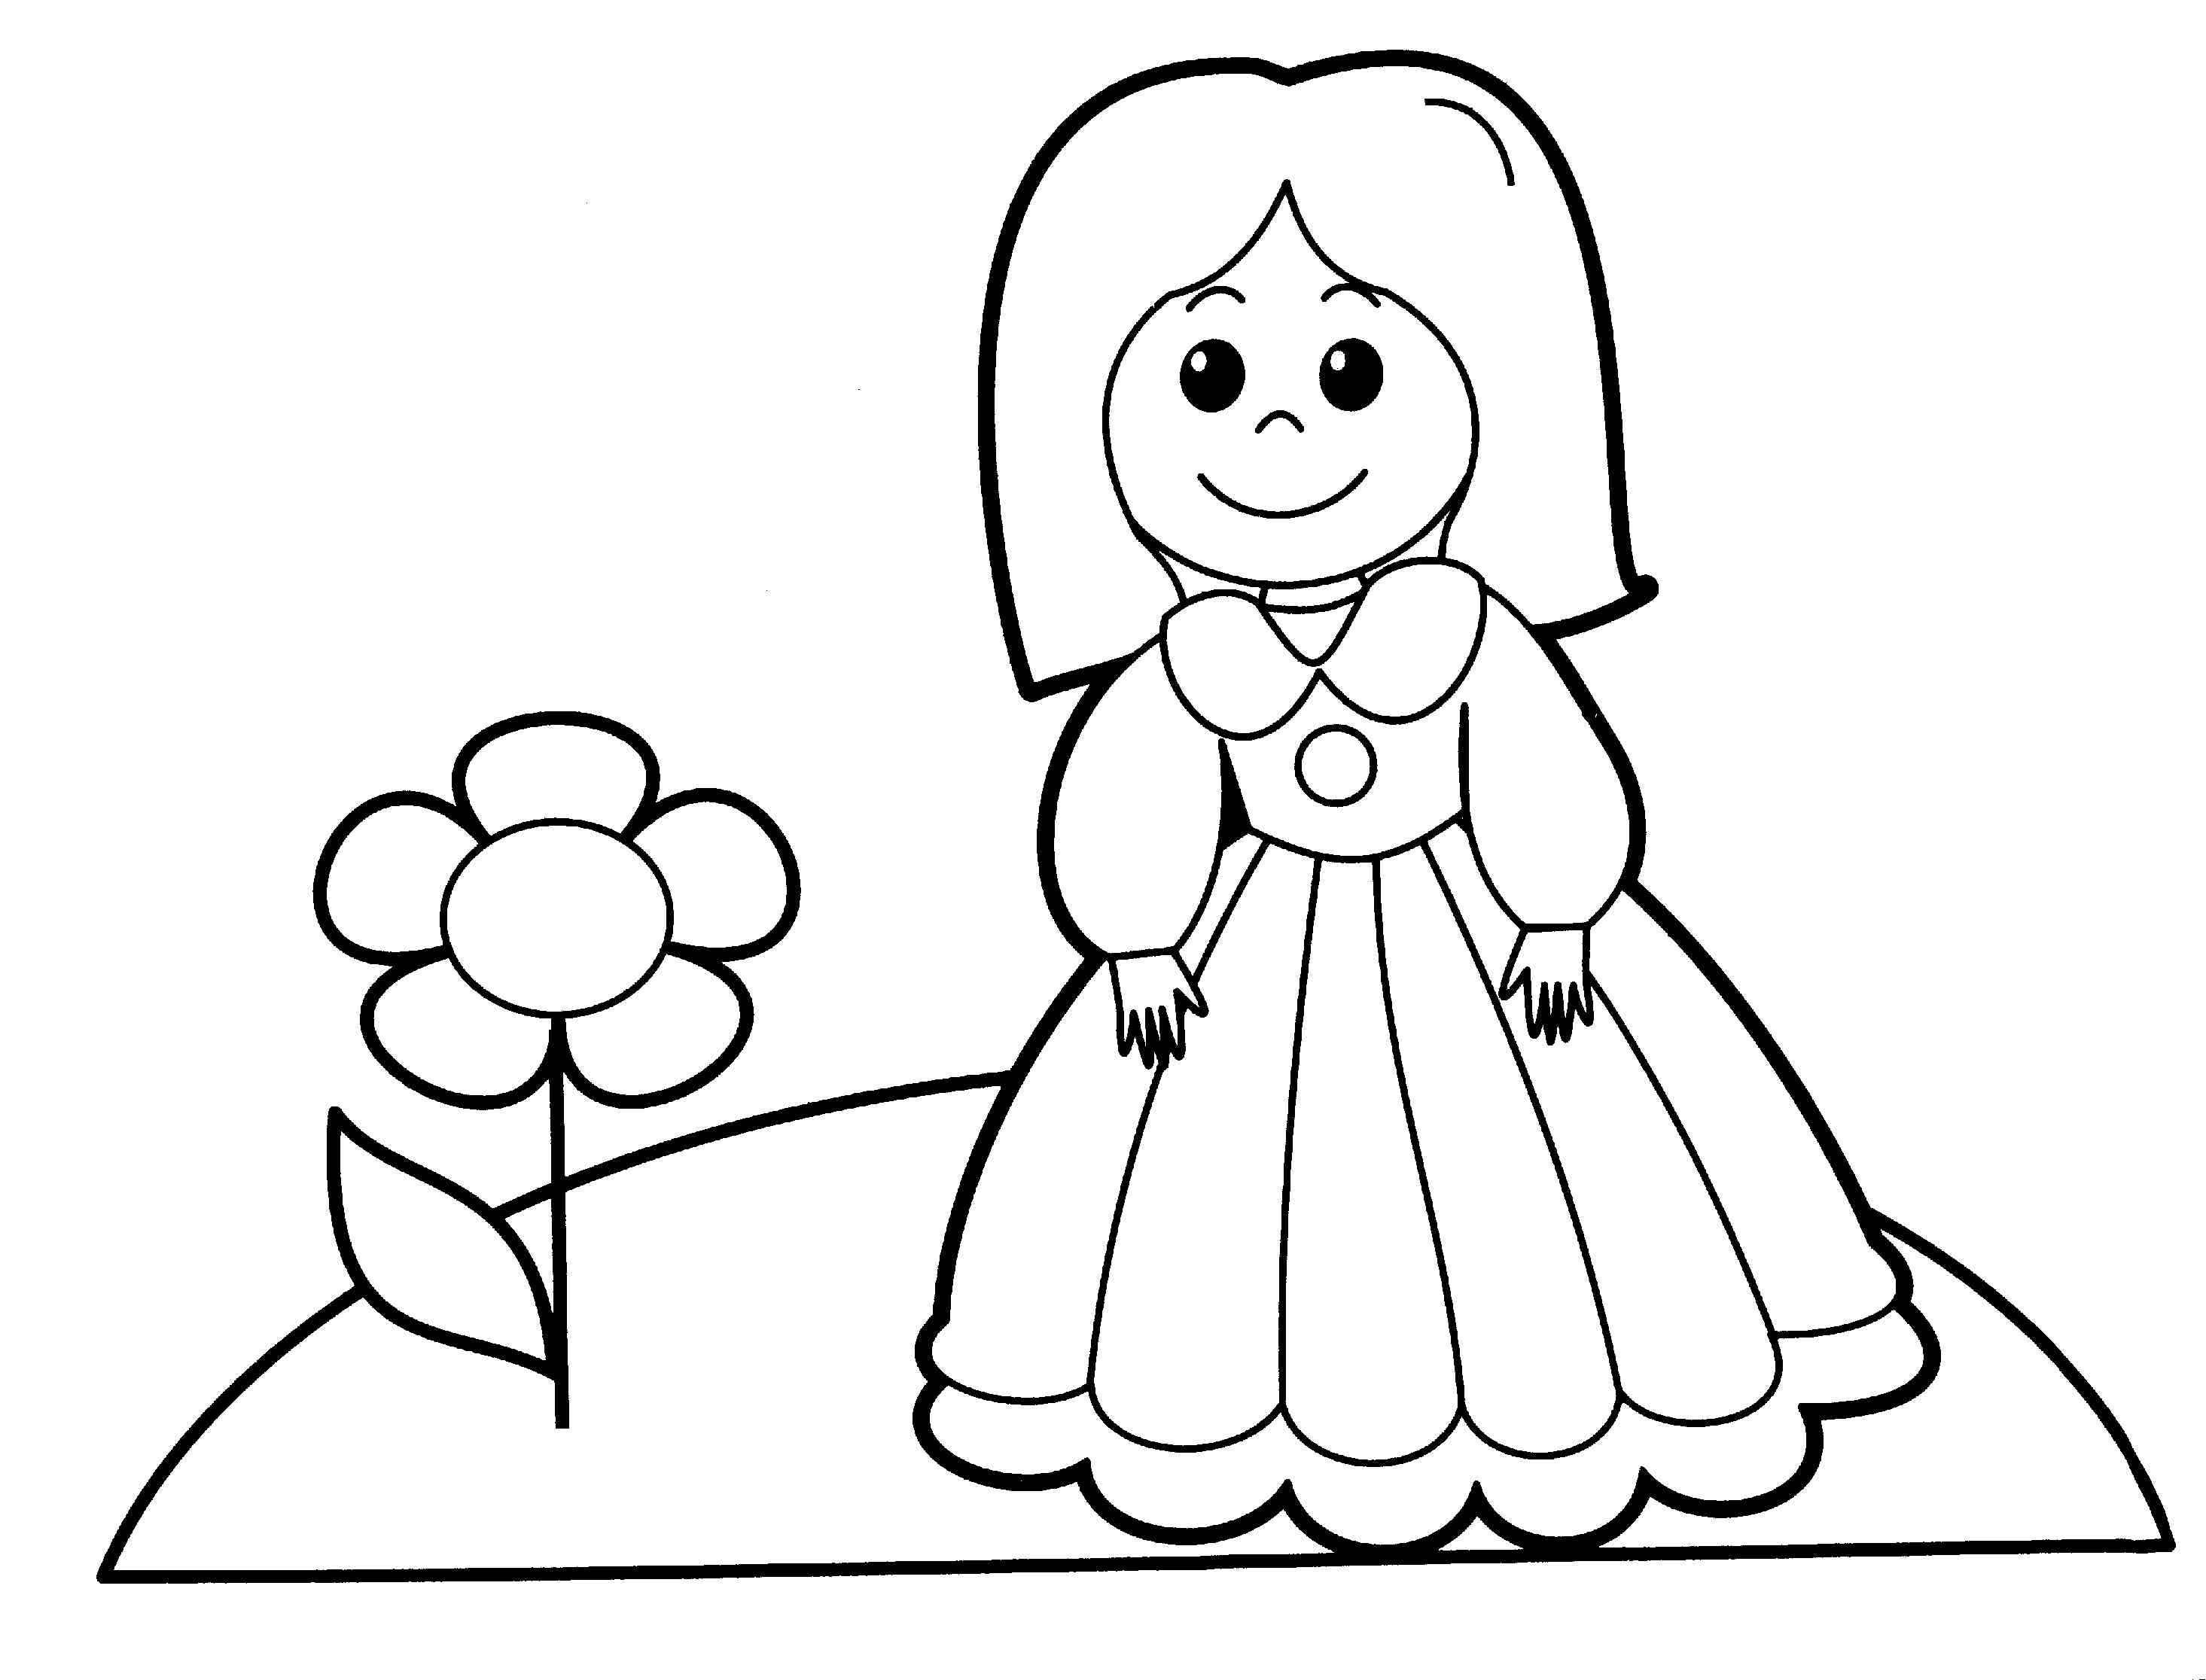 Coloring Pages Of Dolls Outline Sketch Drawing Vector Easy Doll Drawing Easy  Doll Outline Easy Doll Sketch PNG and Vector with Transparent Background  for Free Download